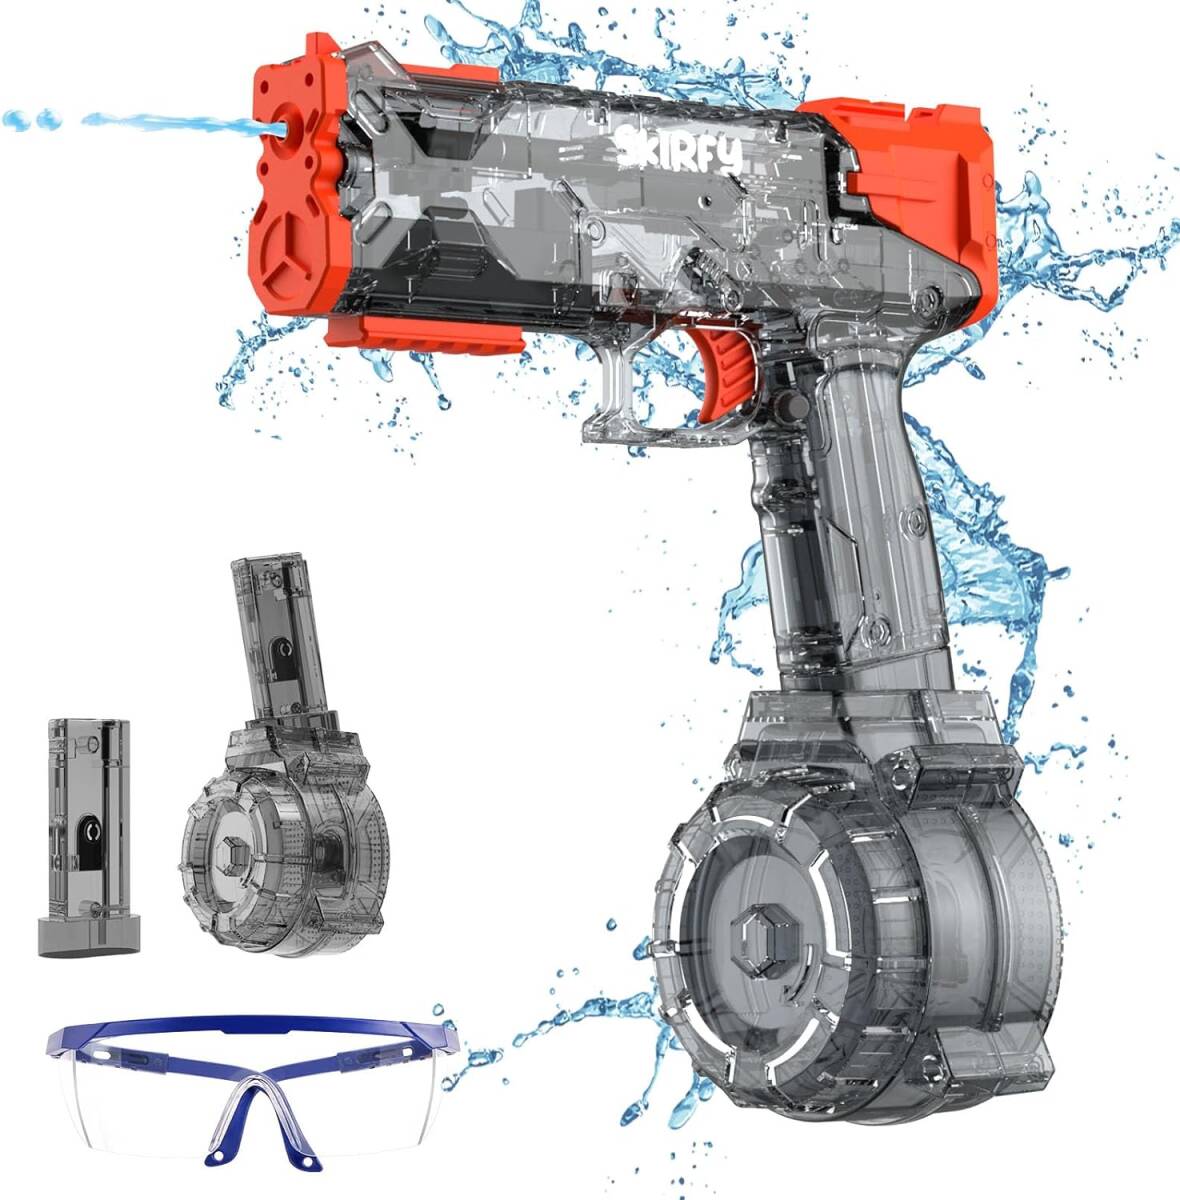  electric water gun hand gun electric water pistol black color super powerful . distance 500ml. water amount tanker 25 minute use possible waterproof battery protection glasses child playing in water 